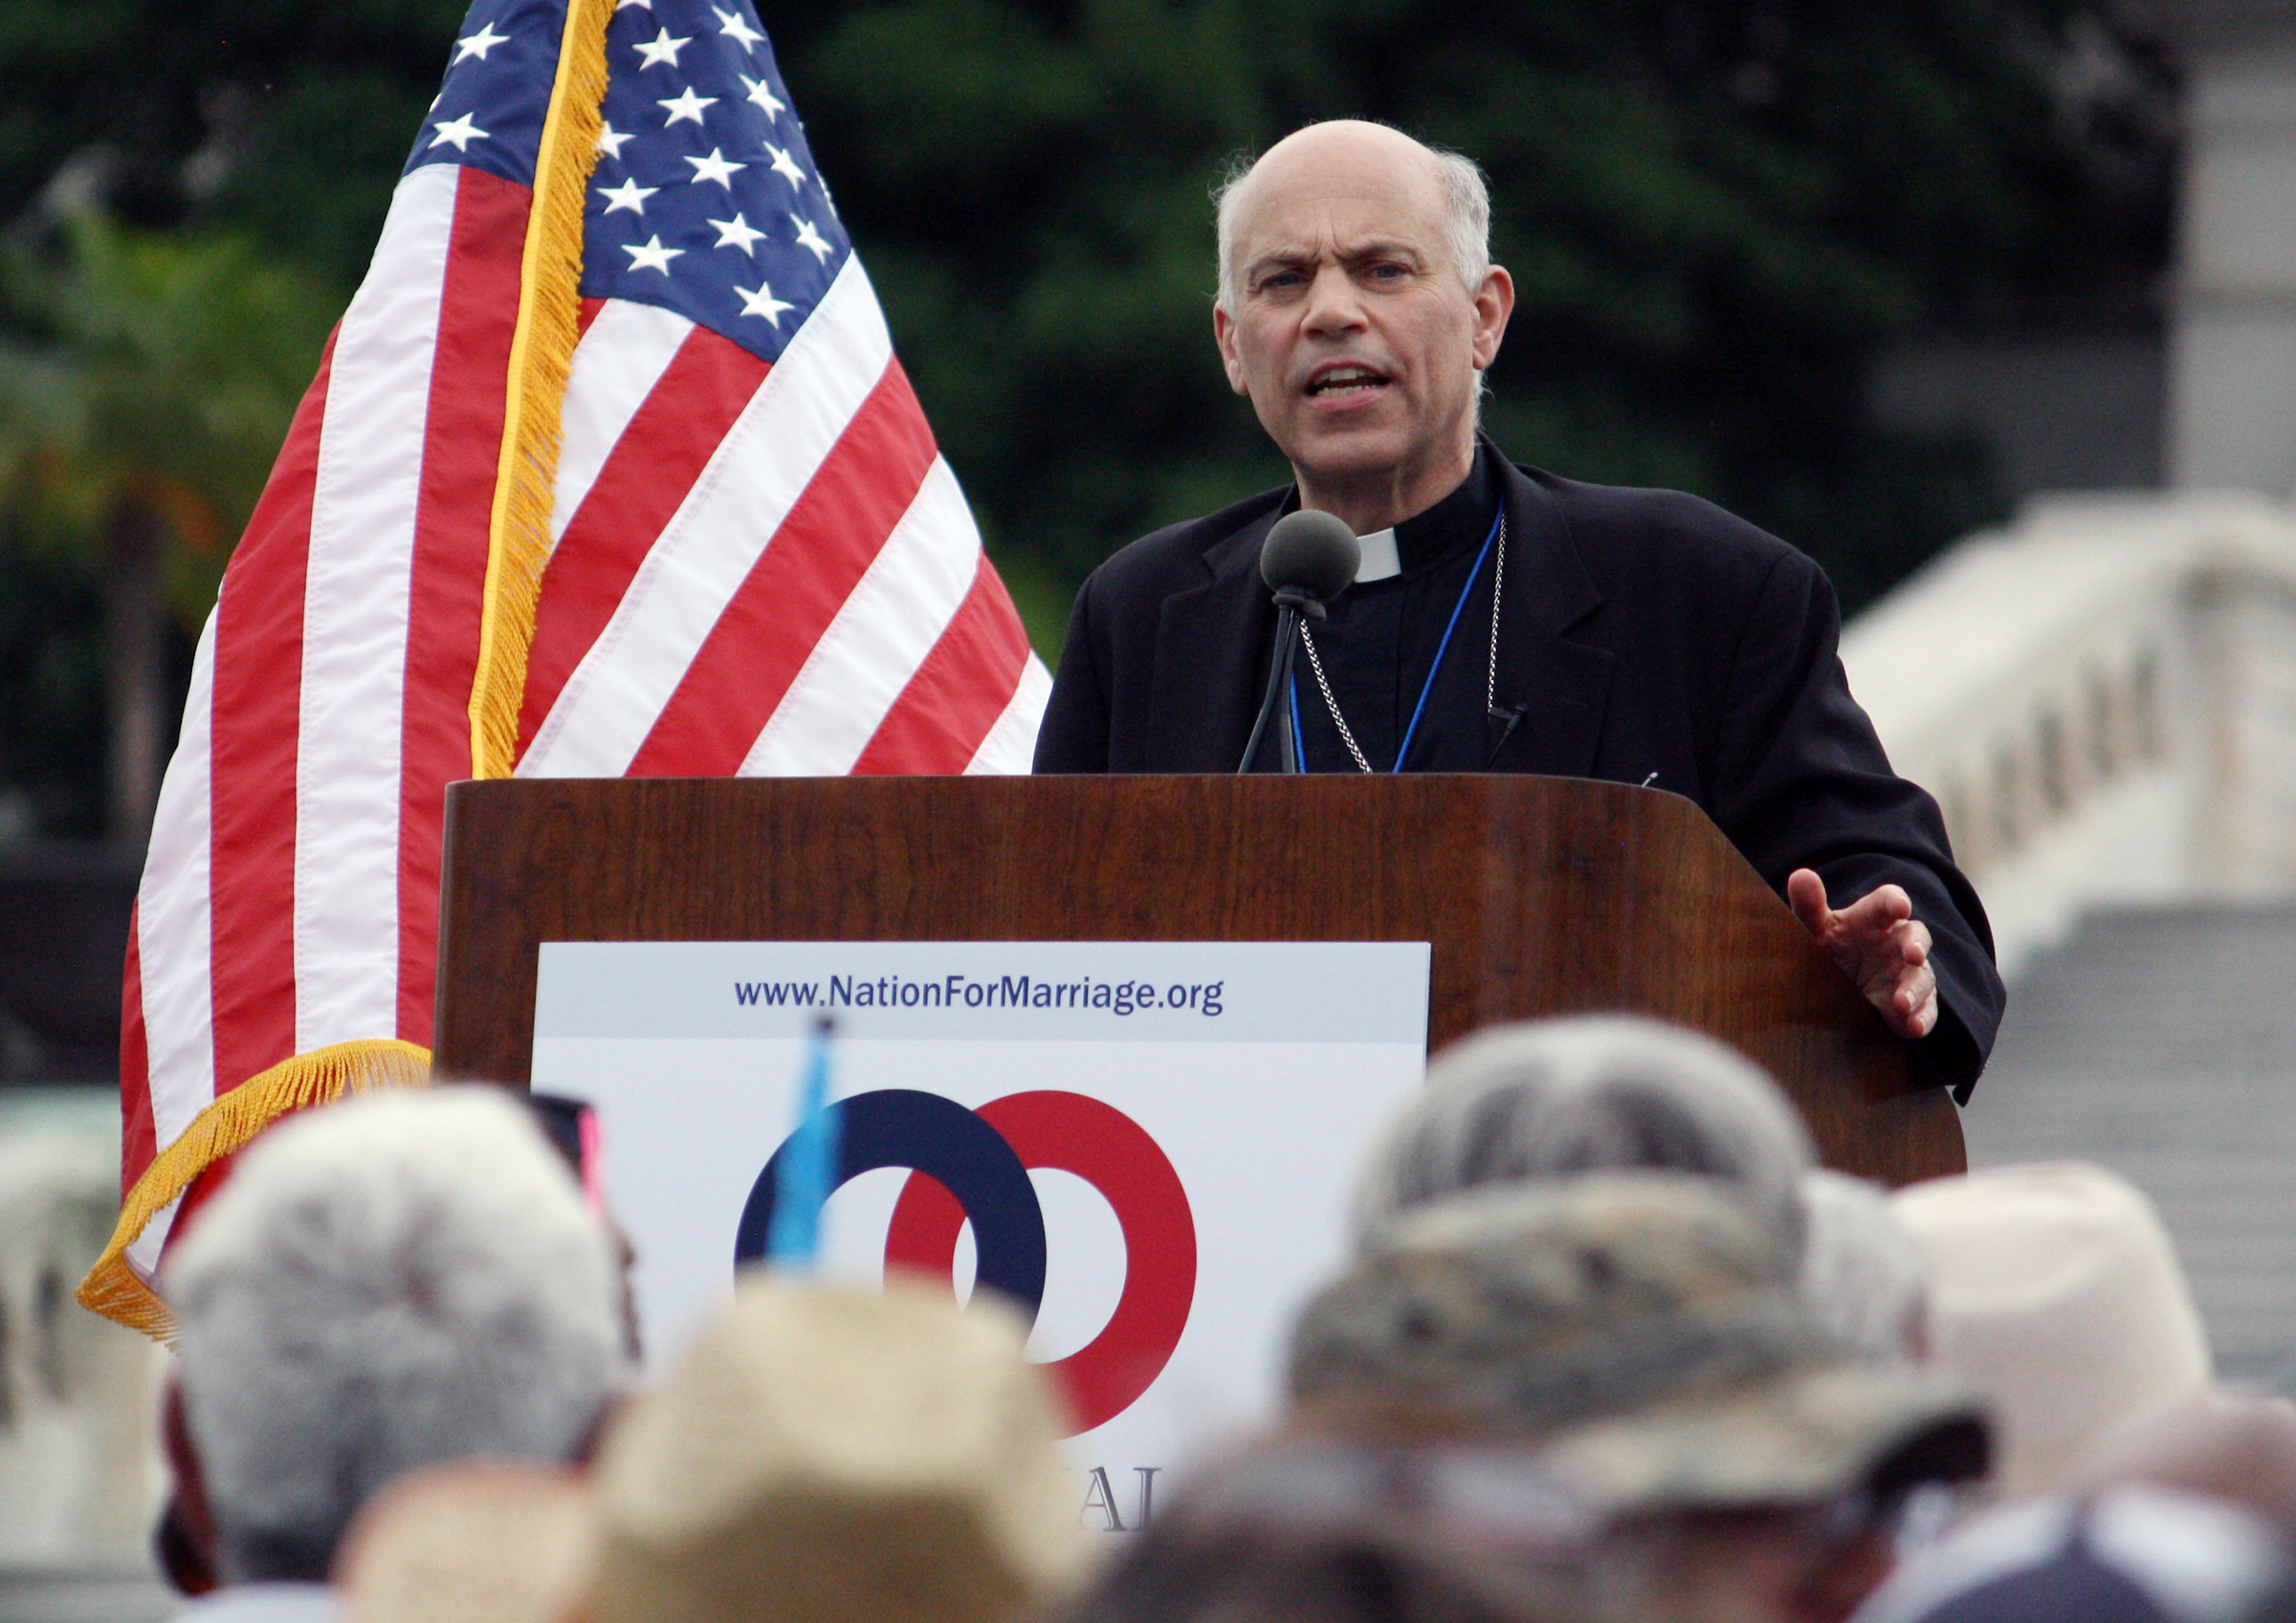 San Francisco Archbishop Salvatore Cordileone addressed the crowd at the 2014 March for Marriage rally on June 19, 2014, in Washington, D.C. RNS photo by Heather Adams